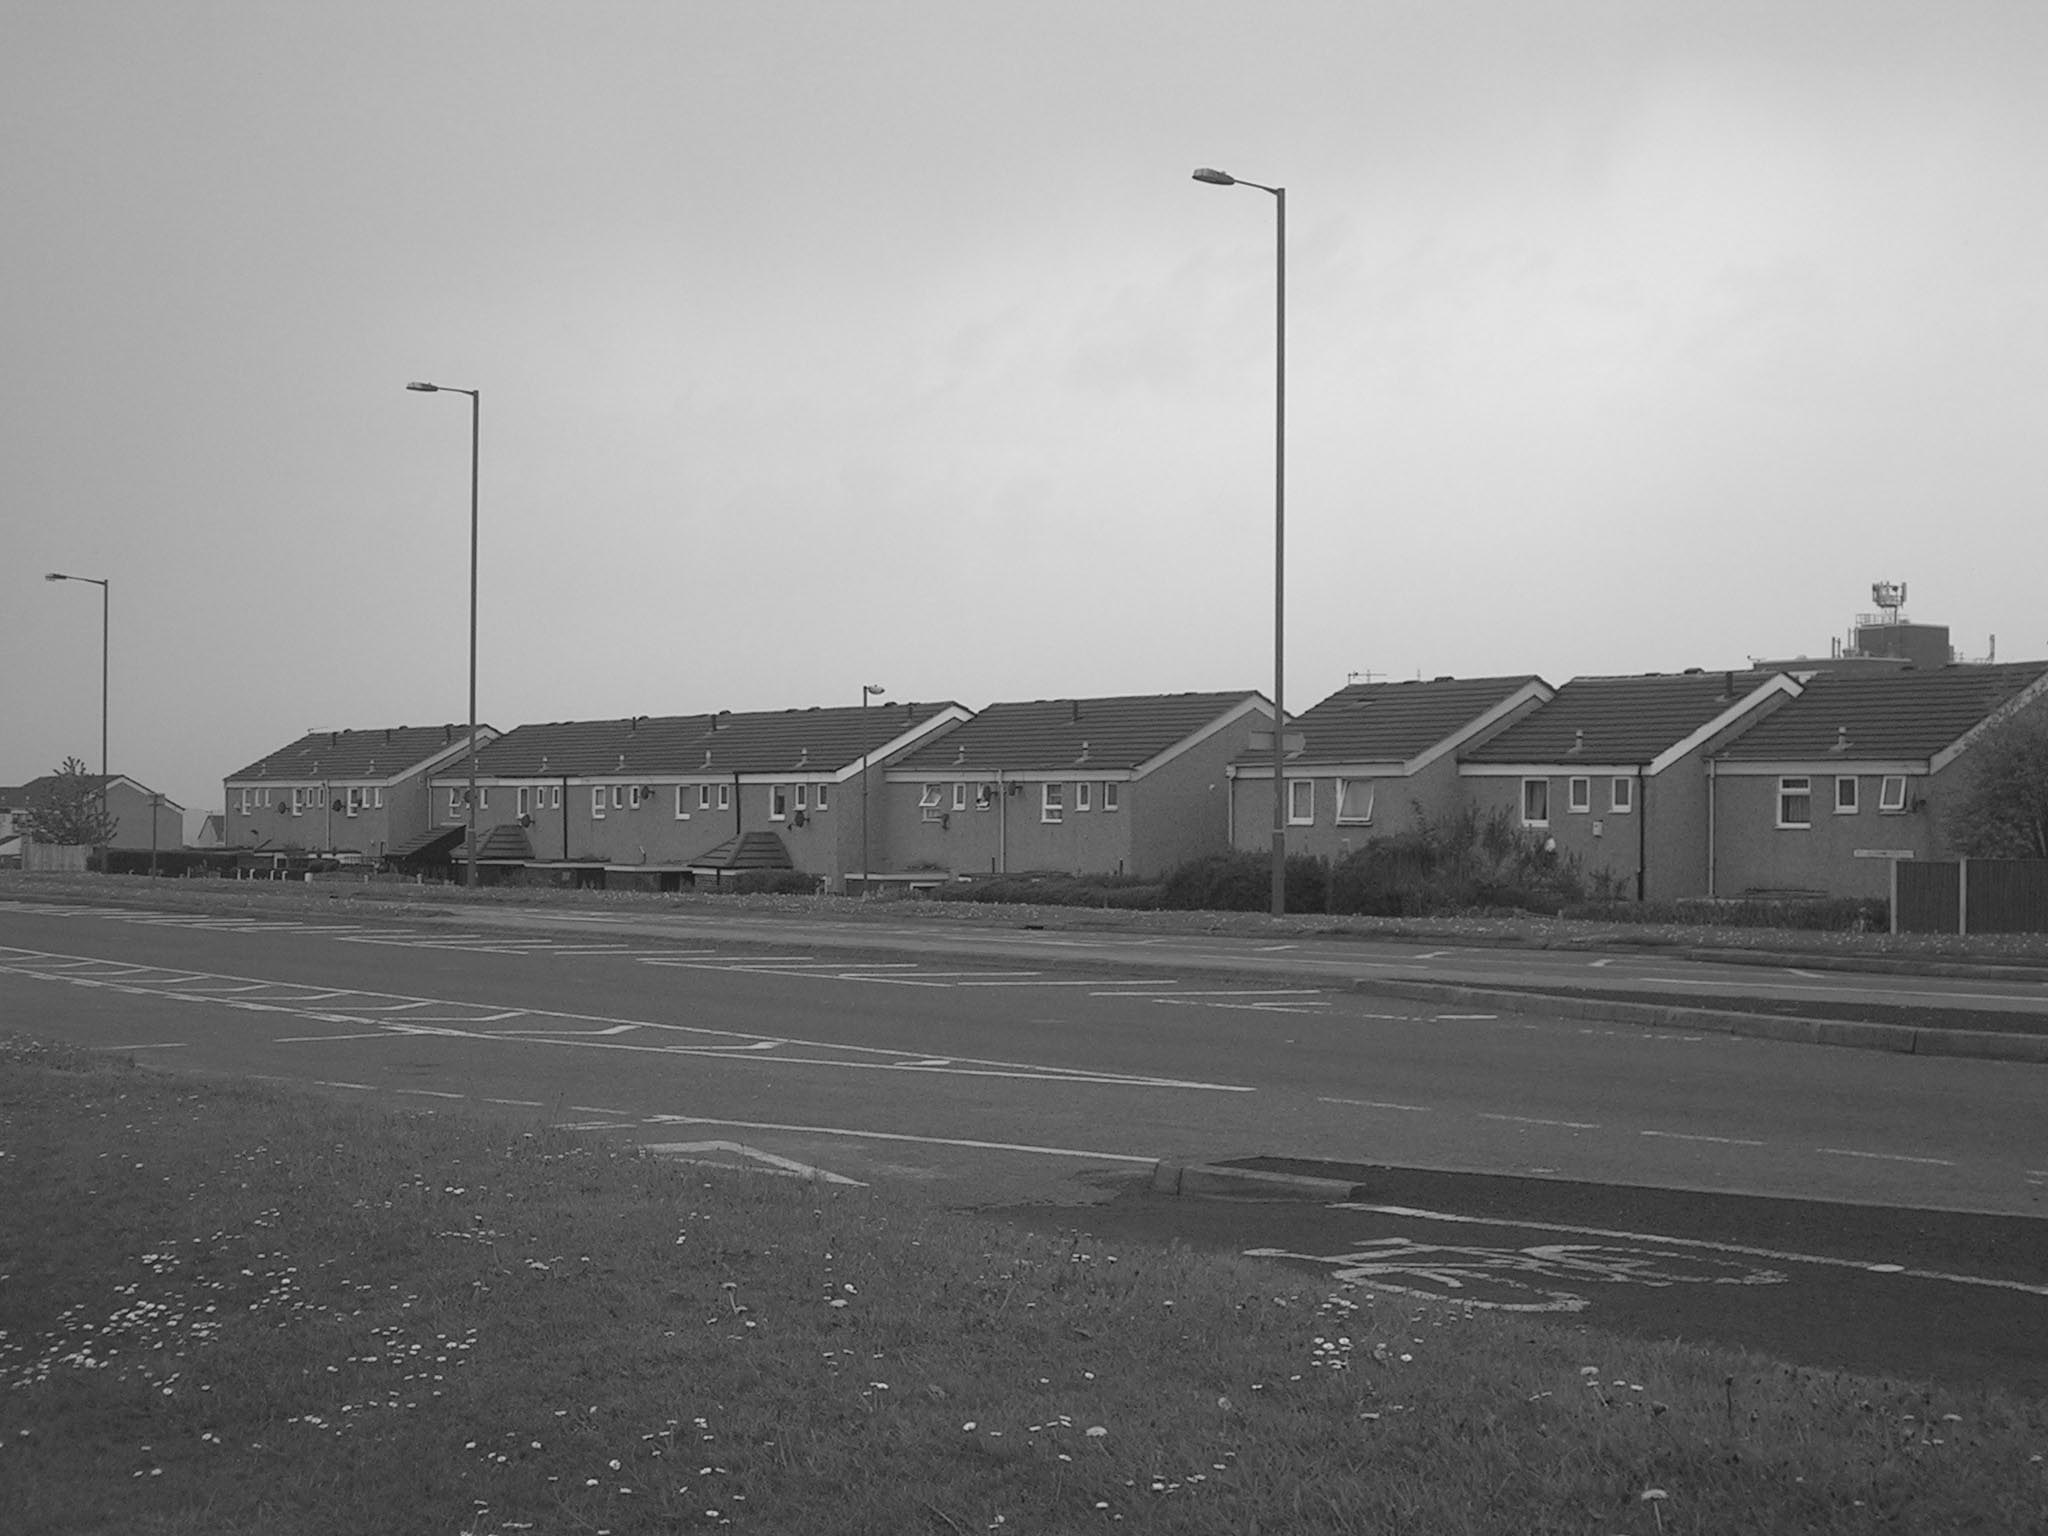 houses on the other side of a road in front of a field